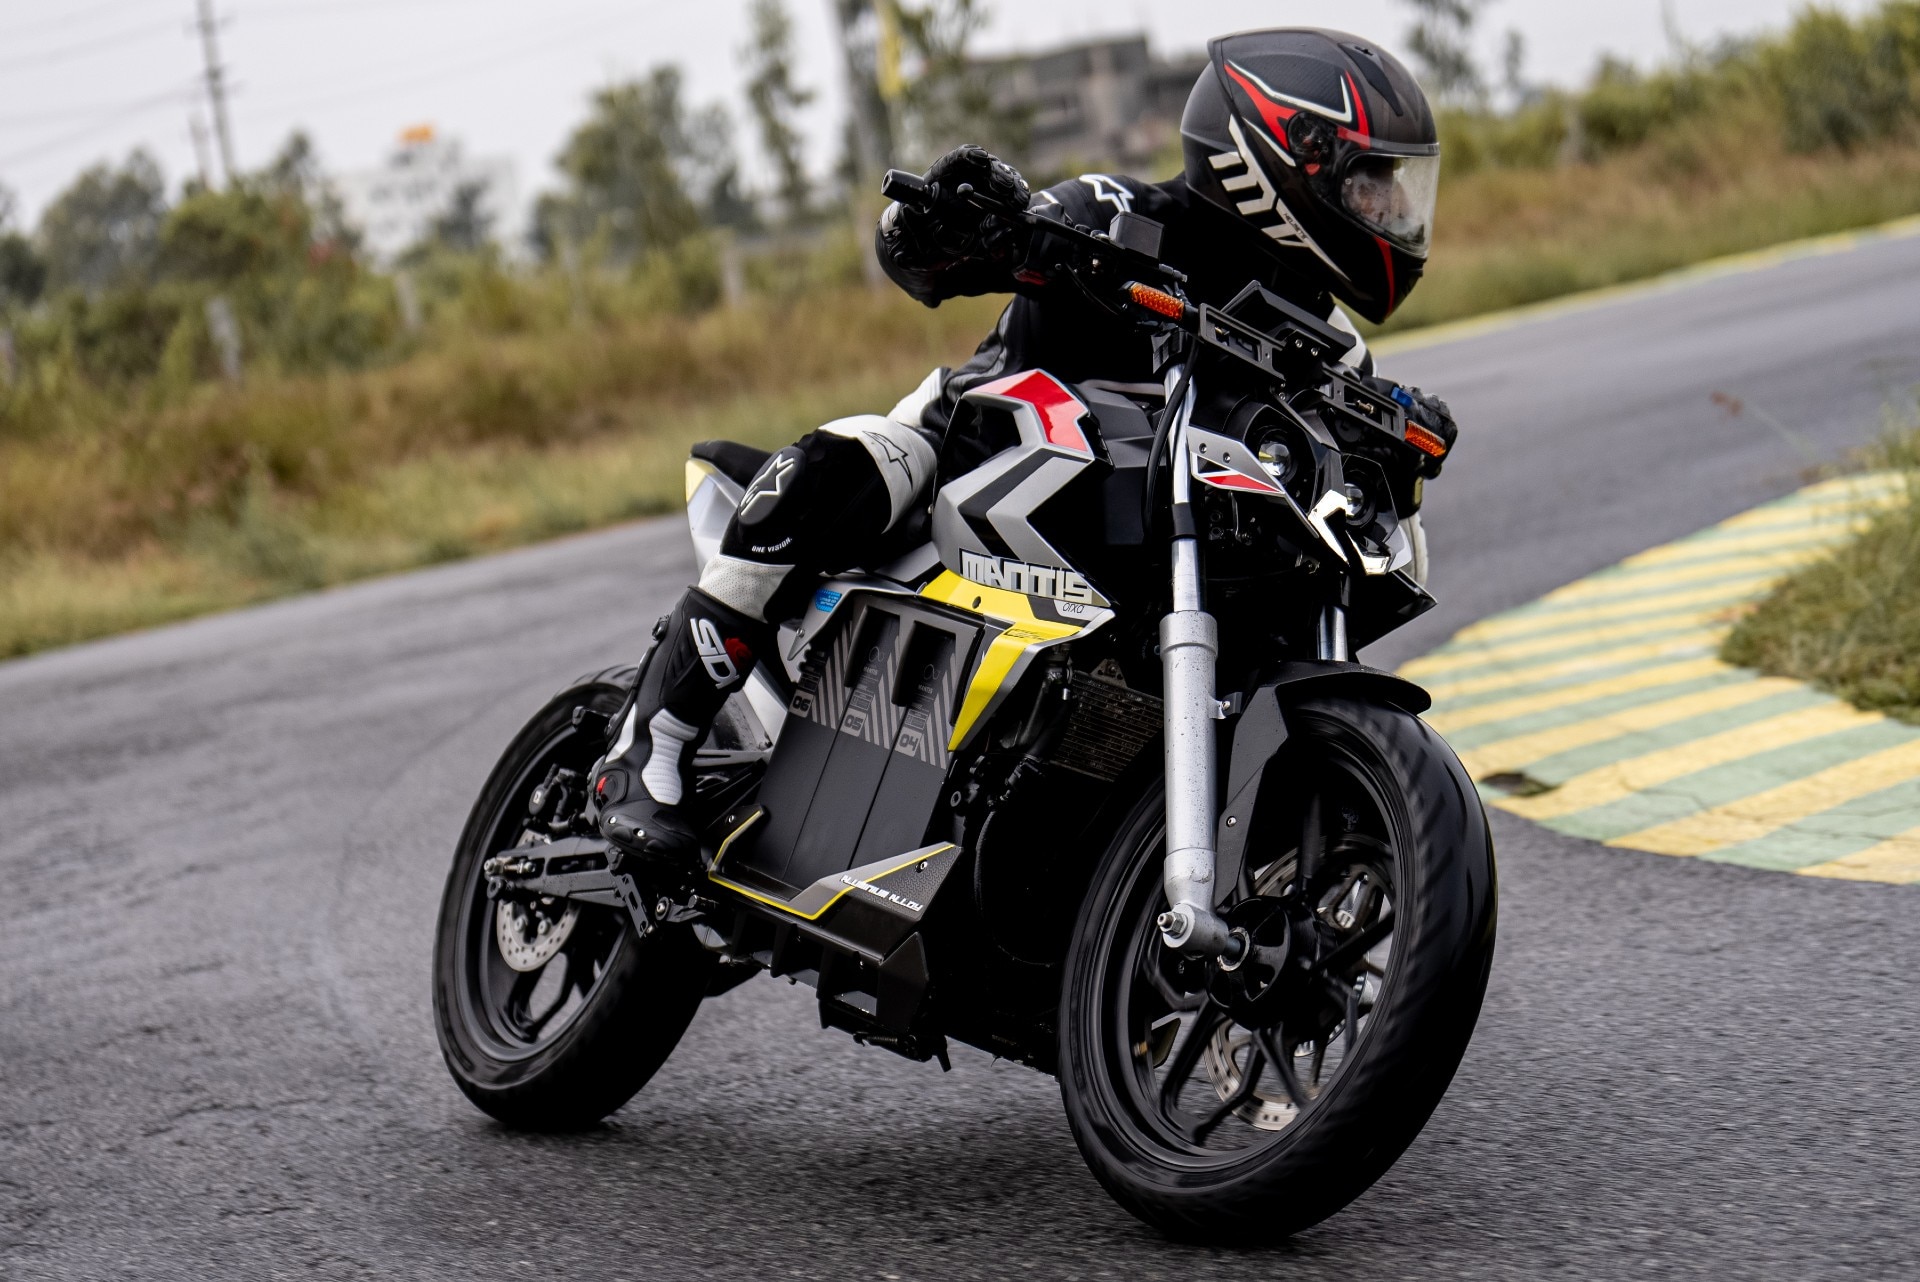 Orxa Mantis electric motorcycle debuted at India Bike Week 2019 and was recently showcased at IBW 2022